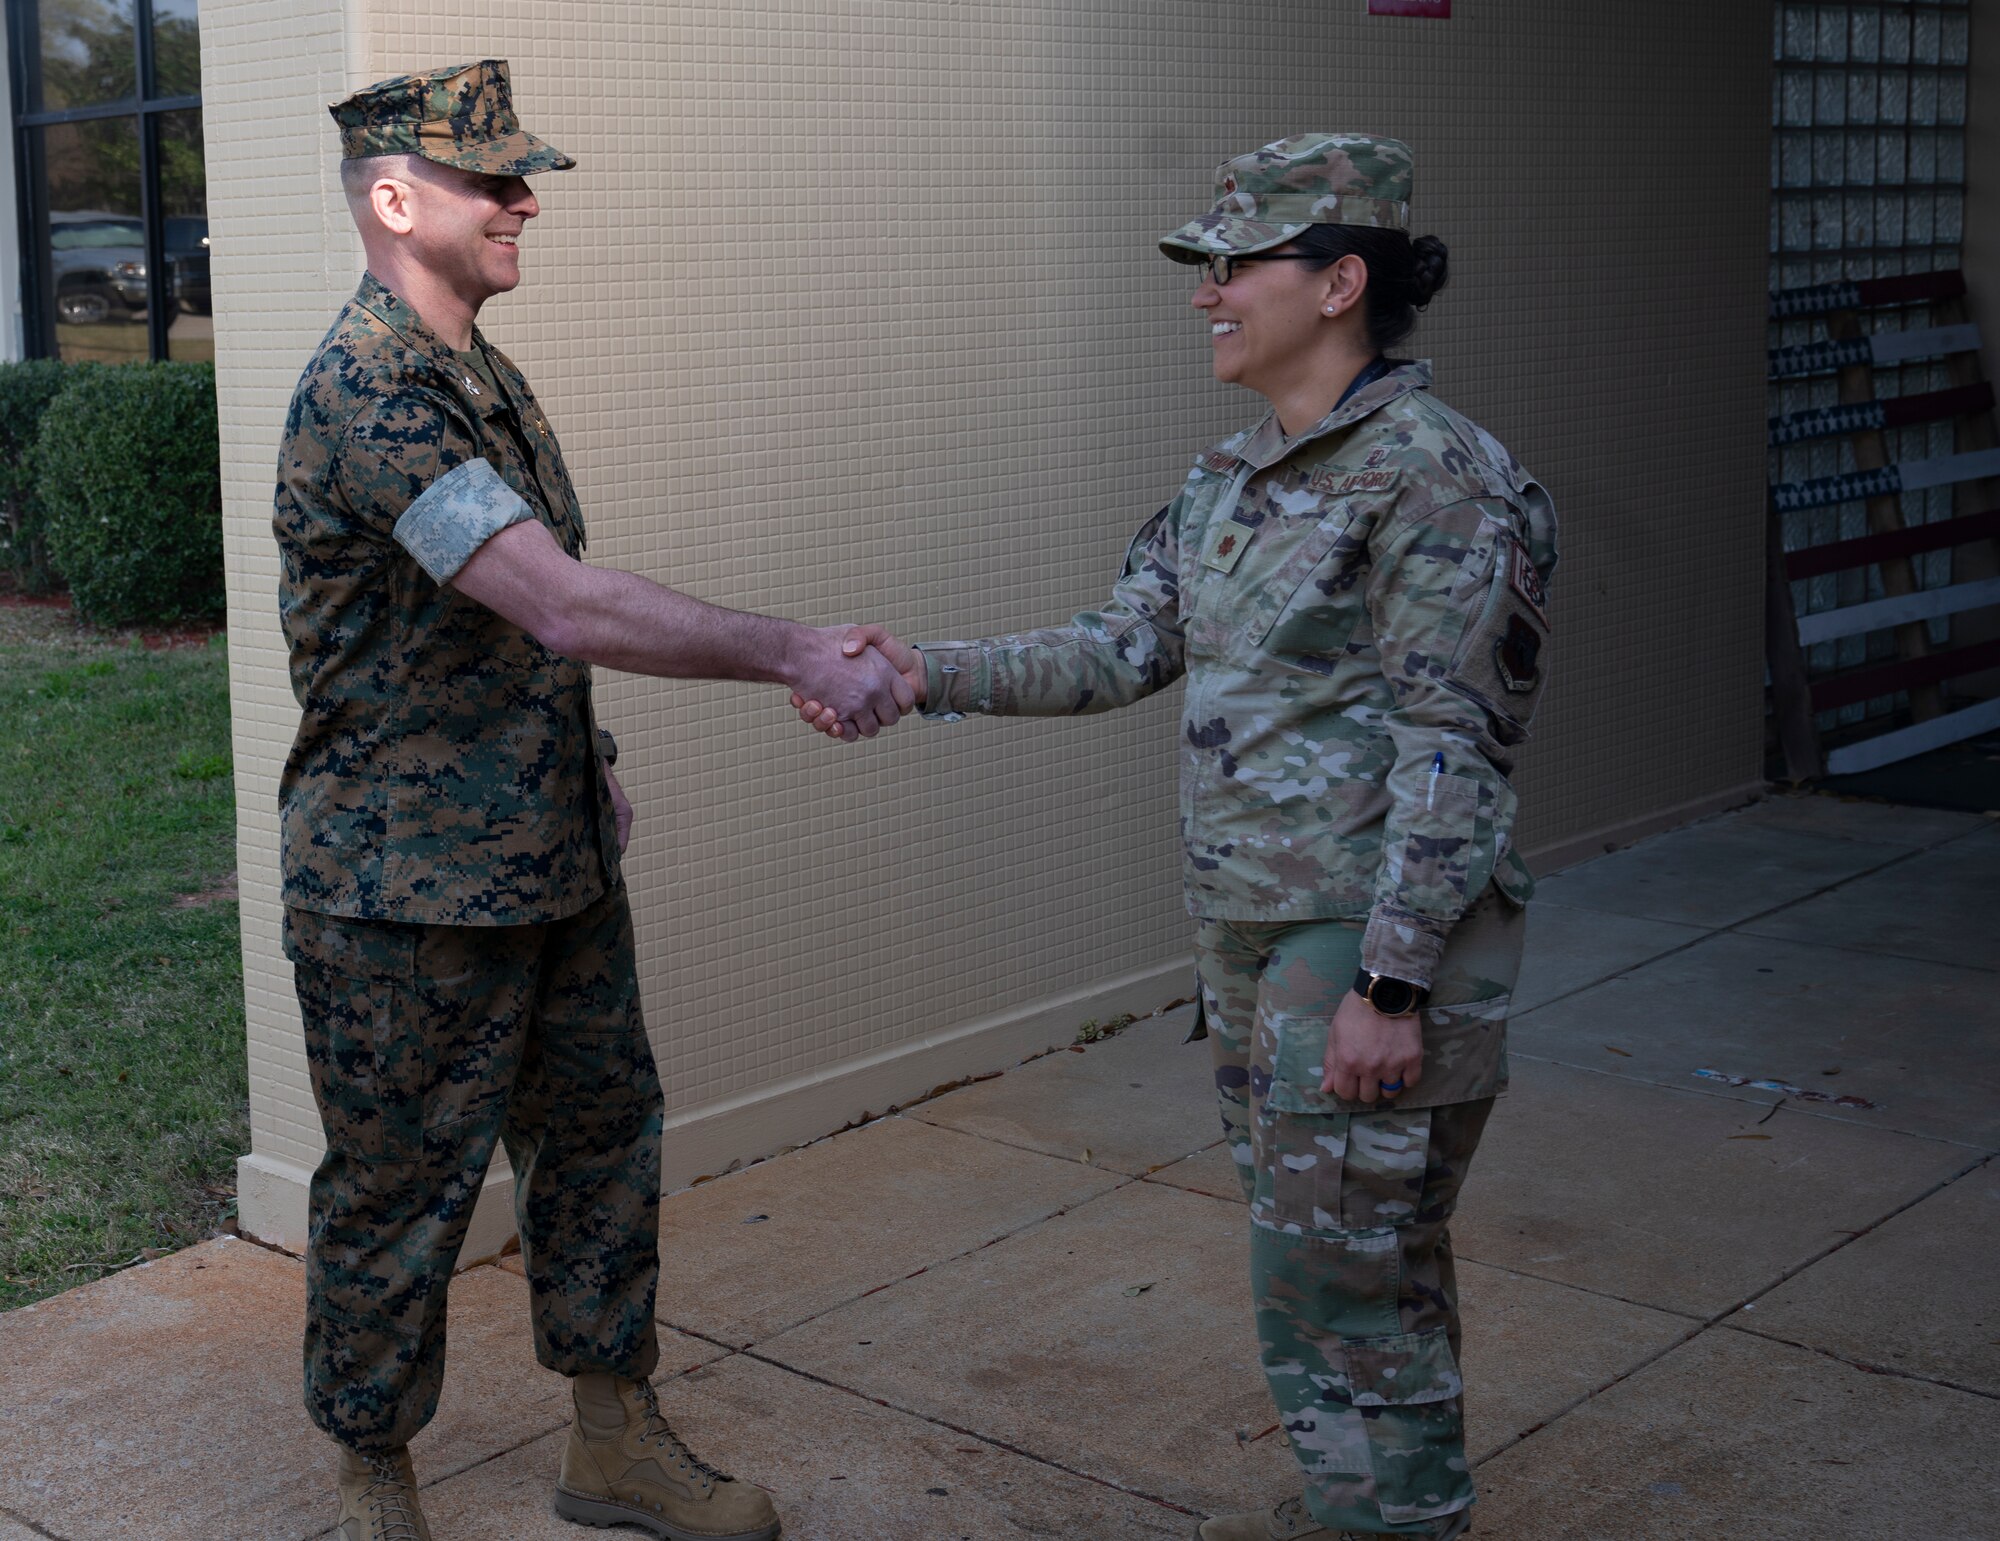 A Marine shakes hands with an Airman